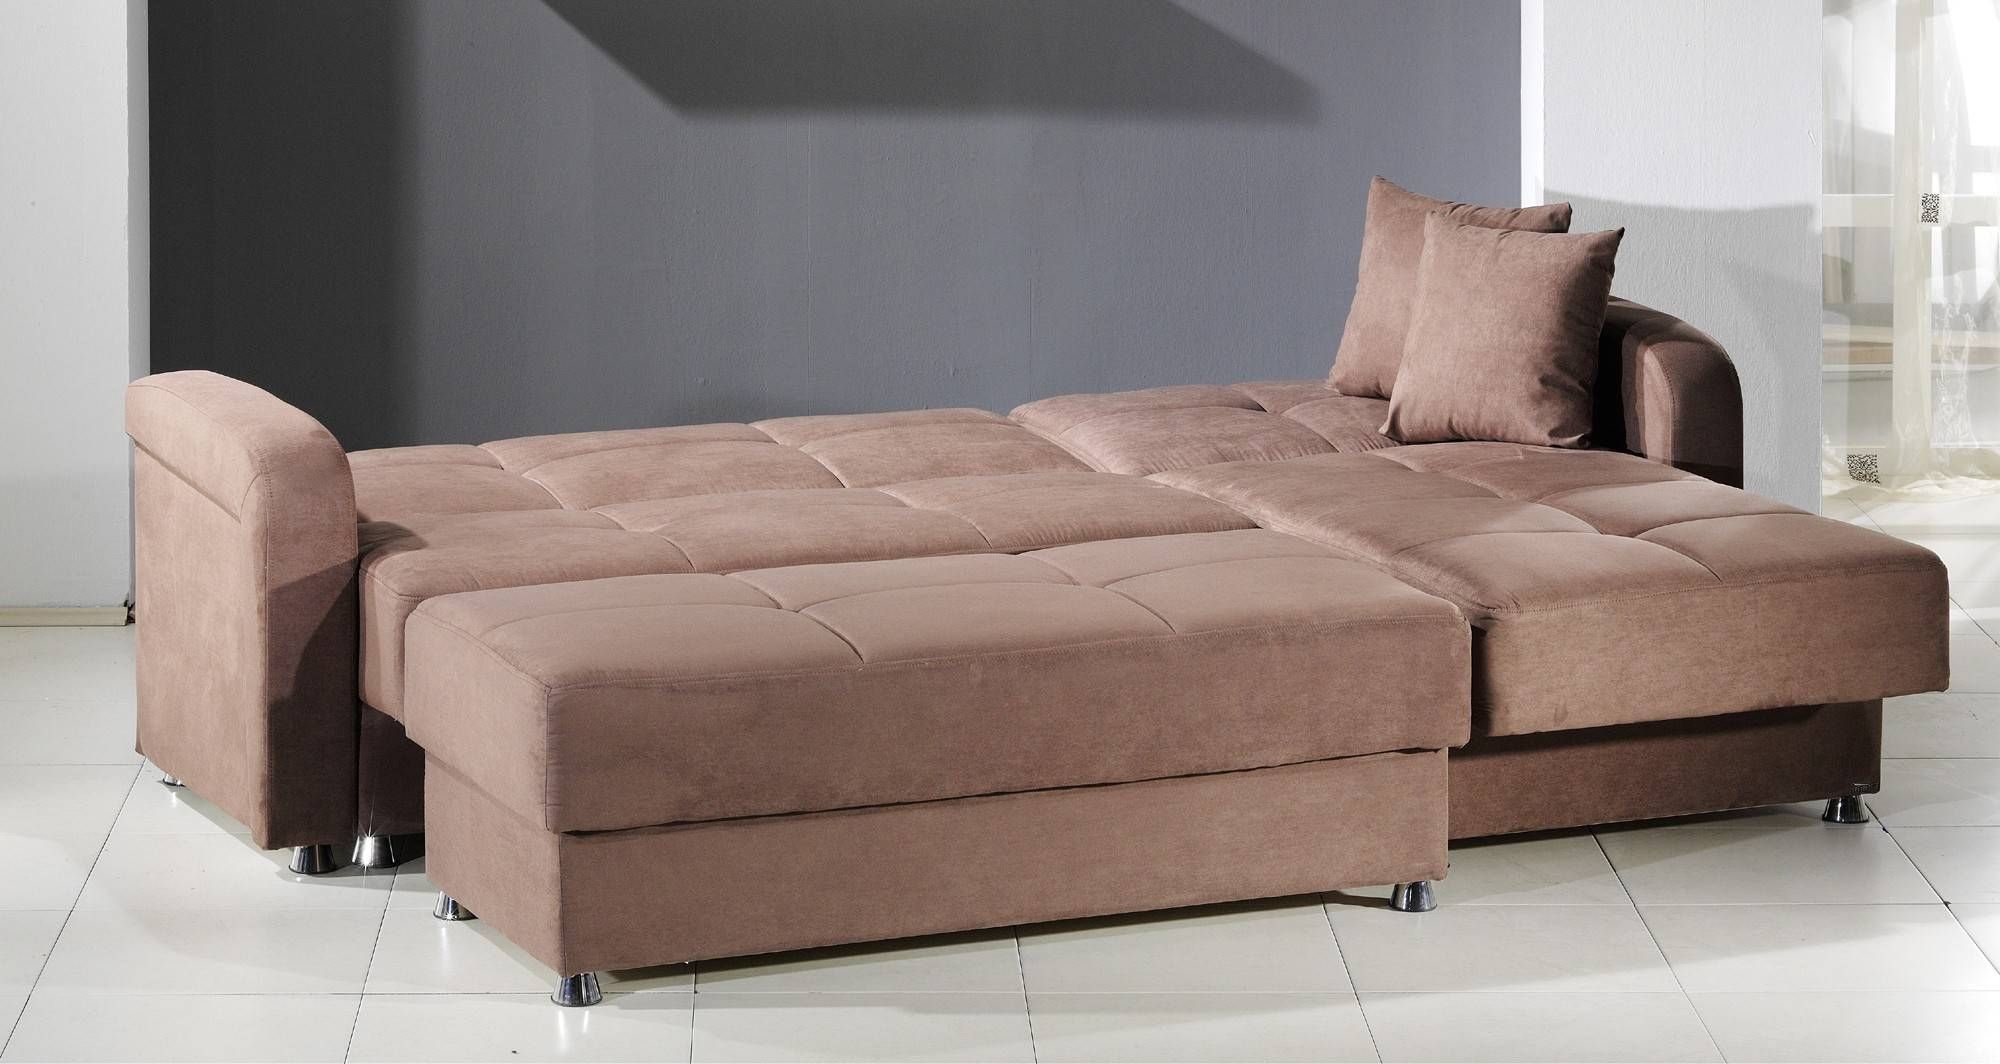 Wonderful Sleeper Sectional Sofa With Chaise Latest Cheap Regarding Sleeper Sectional Sofas (View 16 of 30)